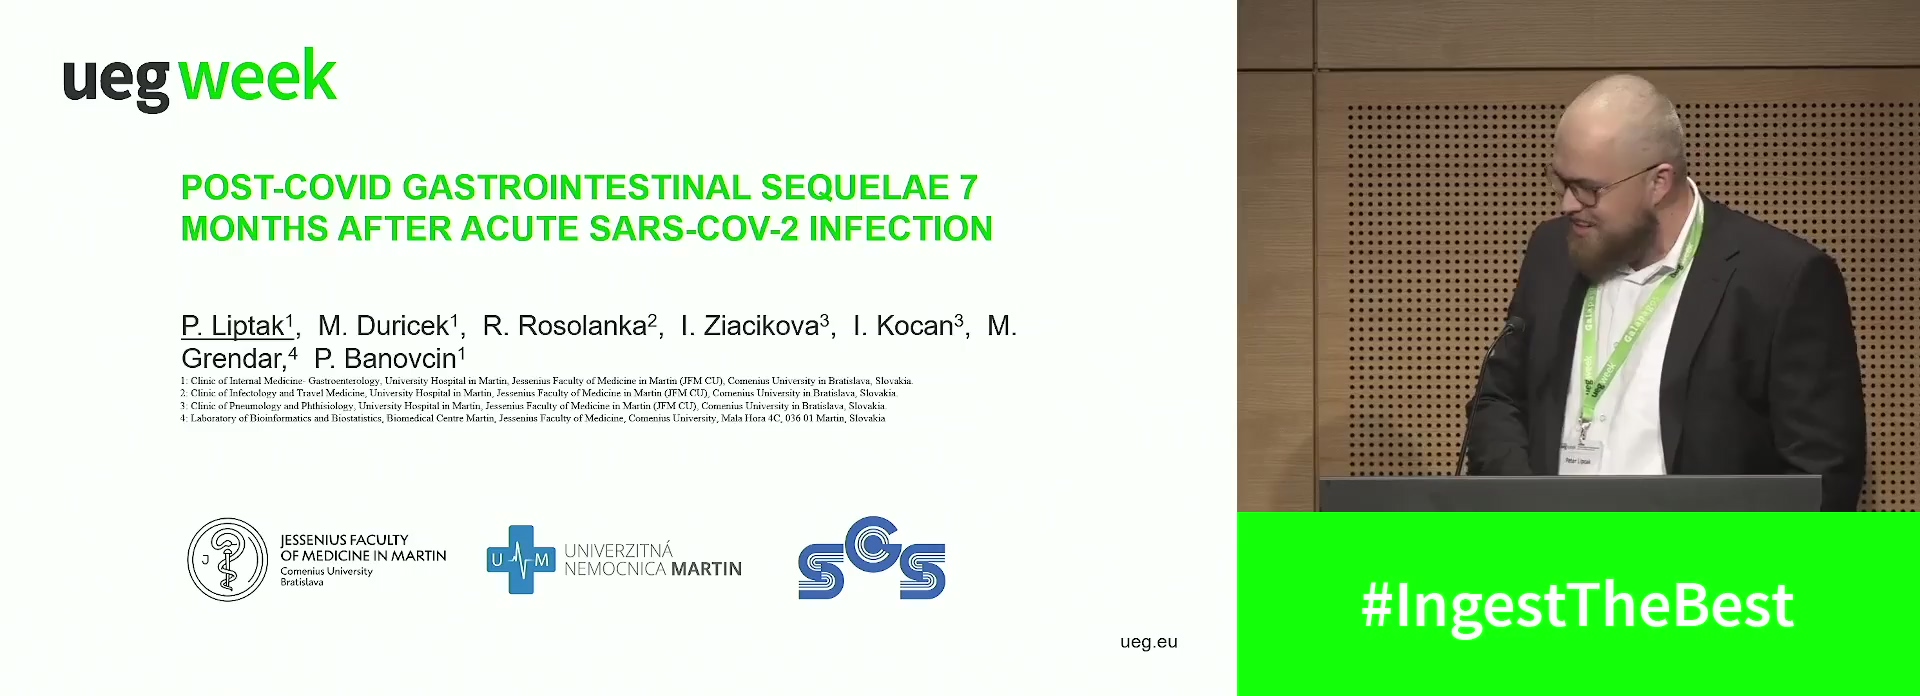 POST-COVID GASTROINTESTINAL SEQUELAE 7 MONTHS AFTER ACUTE SARS-COV-2 INFECTION